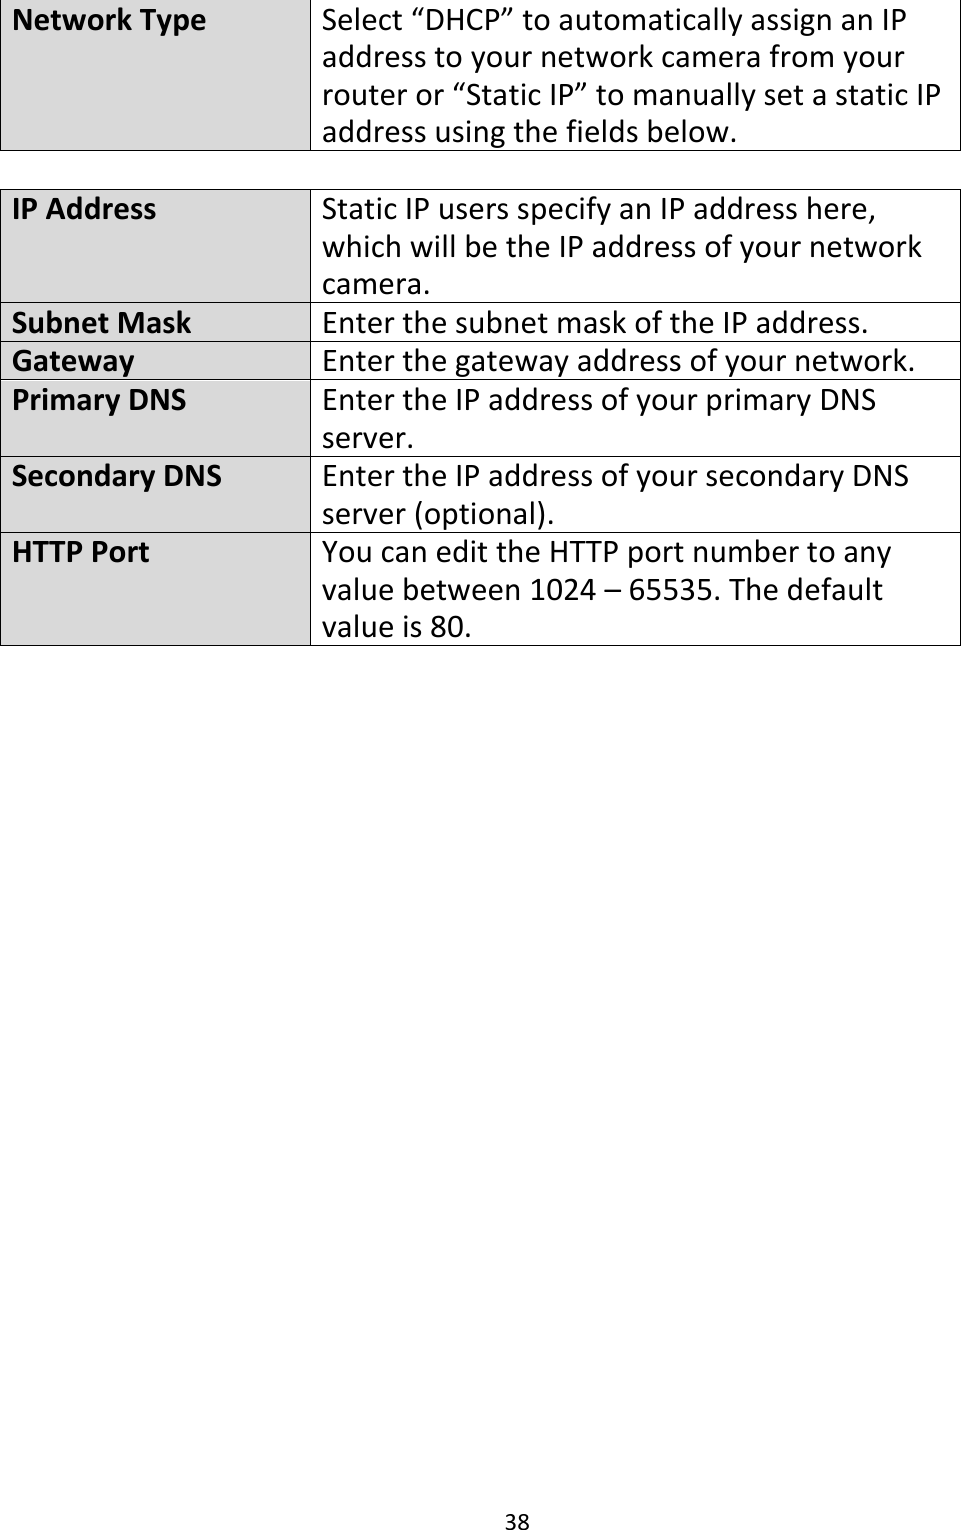 38   Network Type Select “DHCP” to automatically assign an IP address to your network camera from your router or “Static IP” to manually set a static IP address using the fields below.   IP Address Static IP users specify an IP address here, which will be the IP address of your network camera. Subnet Mask Enter the subnet mask of the IP address. Gateway Enter the gateway address of your network. Primary DNS Enter the IP address of your primary DNS server.  Secondary DNS Enter the IP address of your secondary DNS server (optional). HTTP Port You can edit the HTTP port number to any value between 1024 – 65535. The default value is 80.  